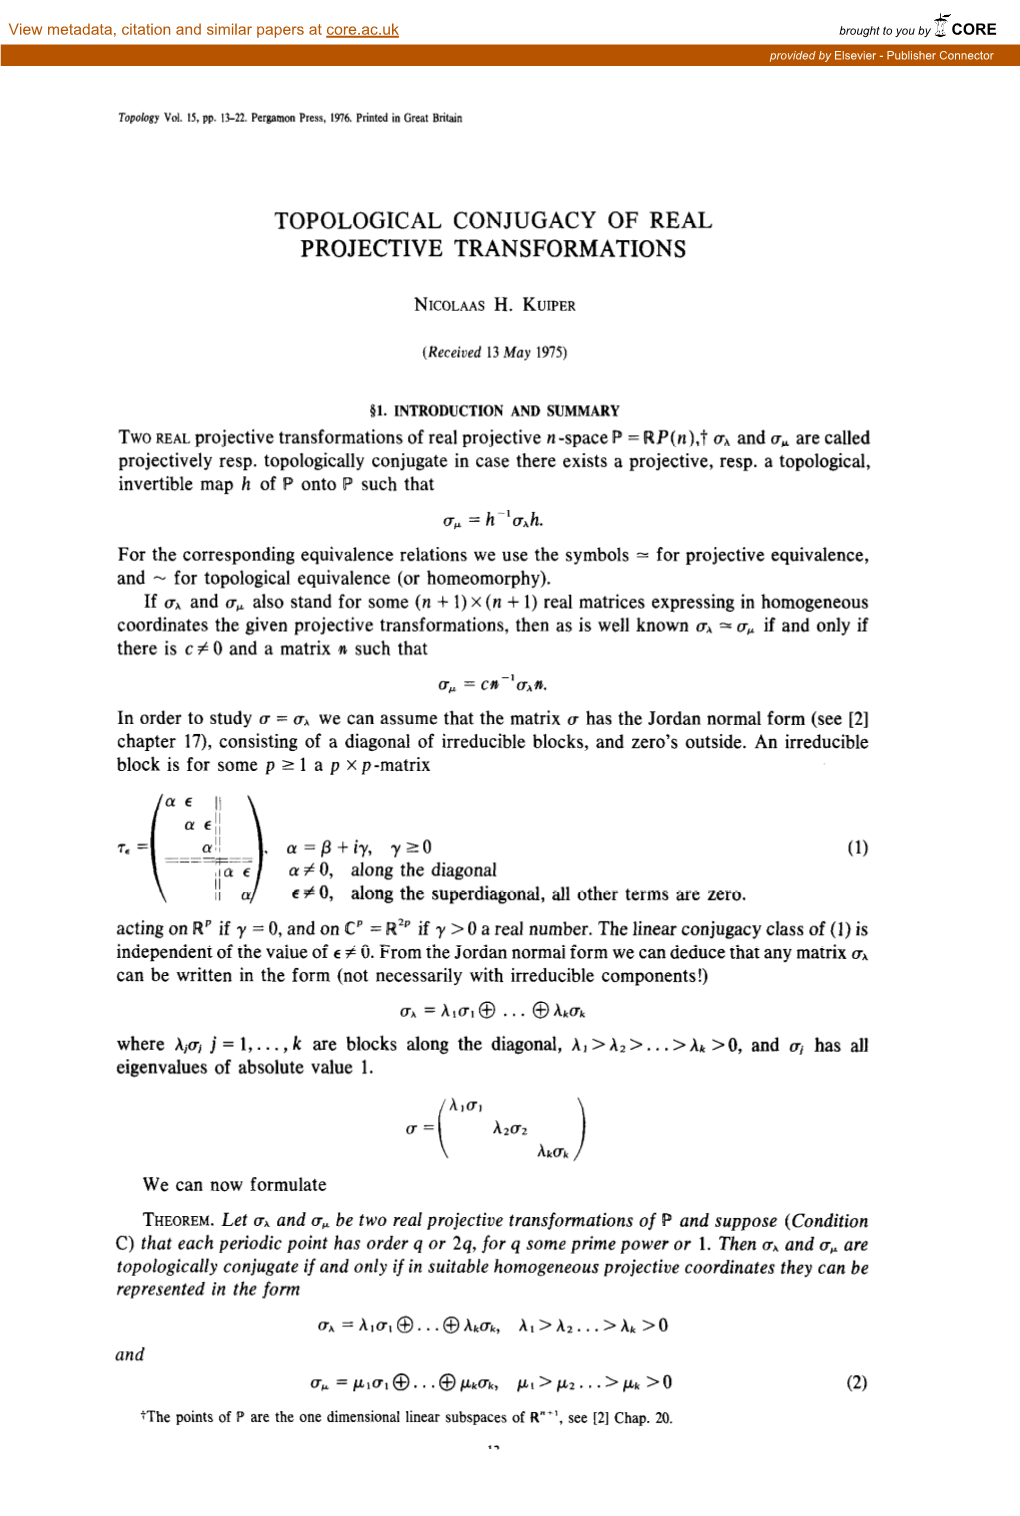 Topological Conjugacy of Real Projective Transformations